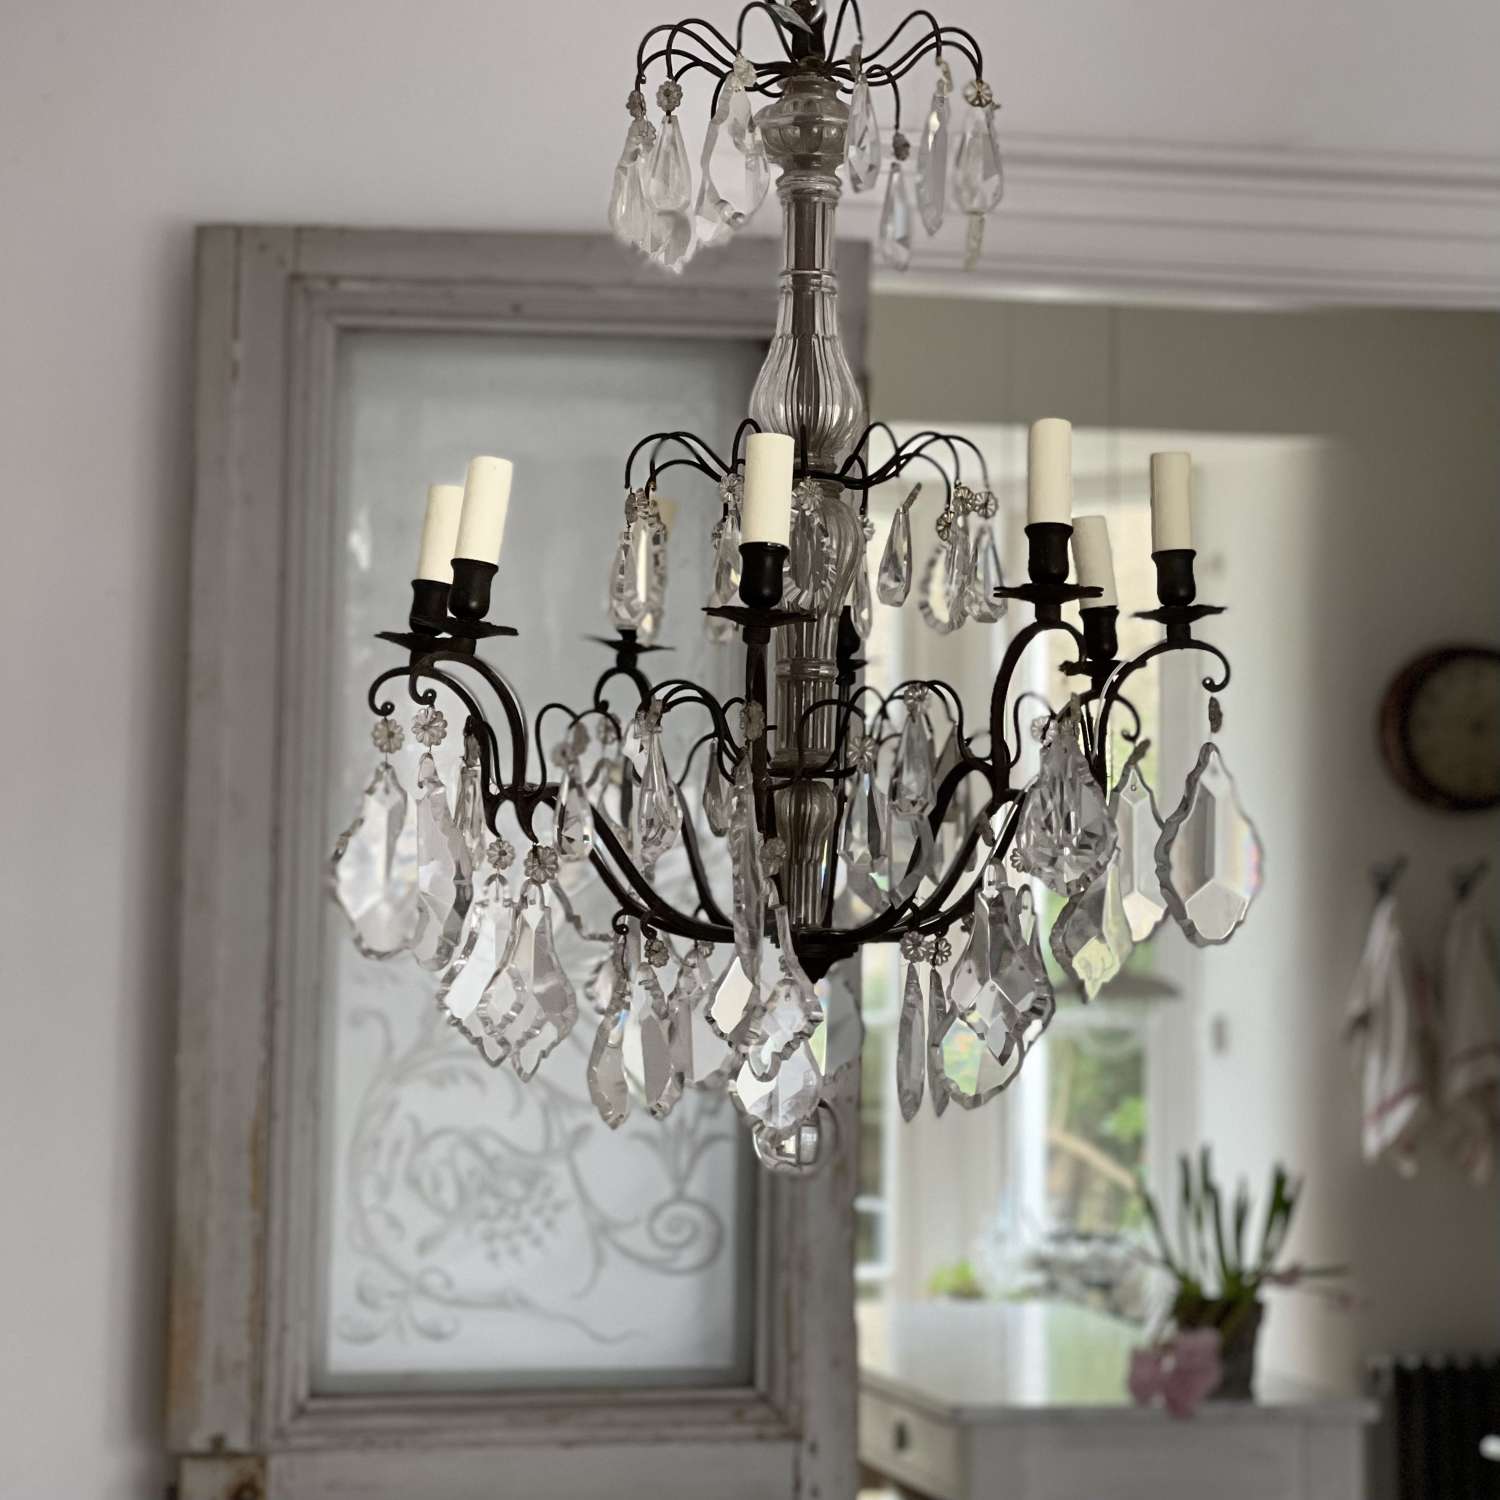 Large antique French crystal chandelier - rewired